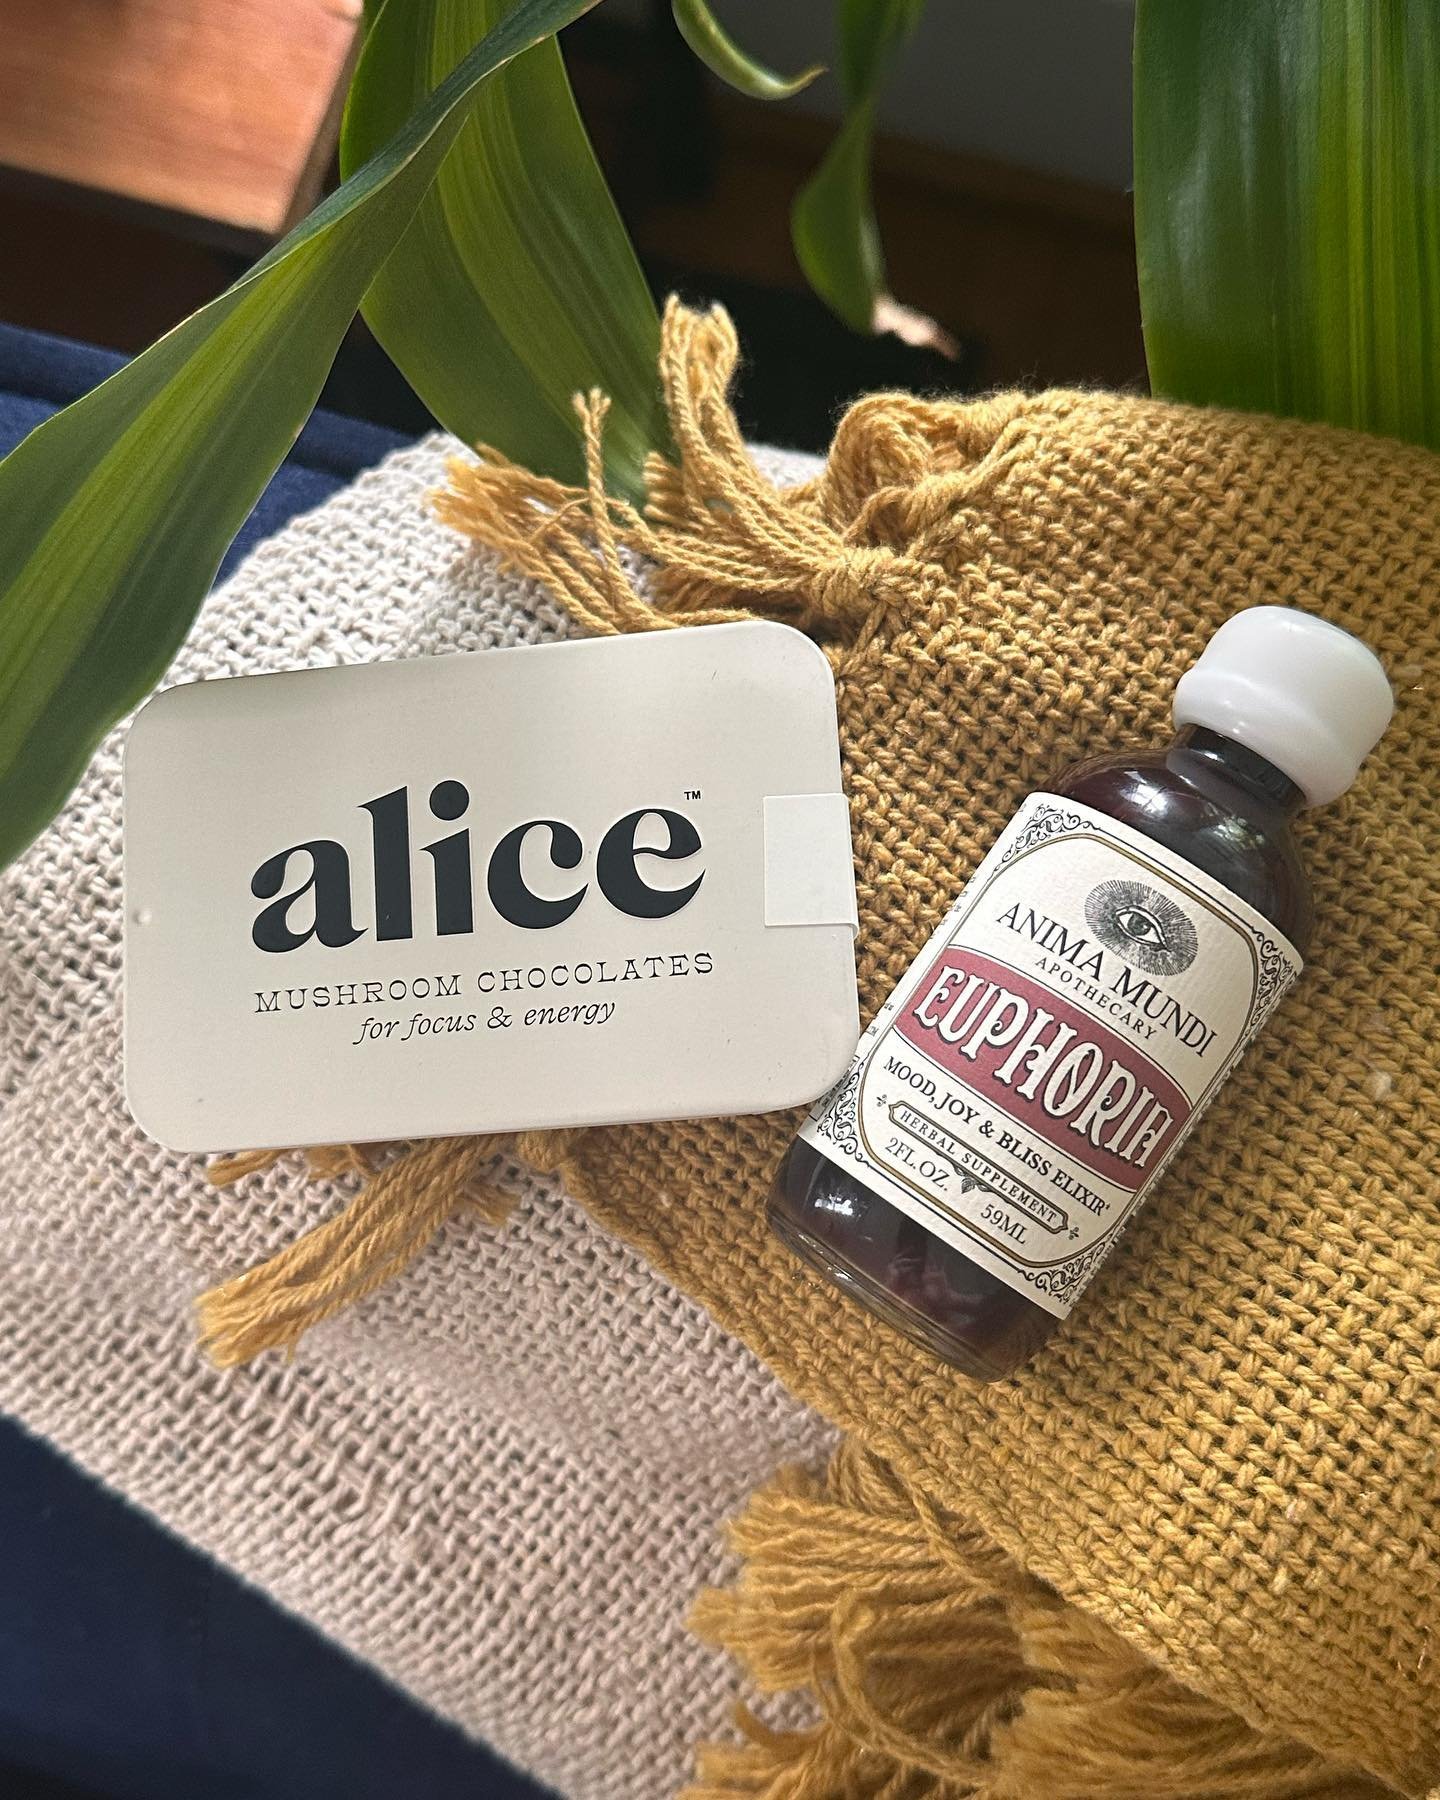 🌞Morning &amp; Evening 🌙 

Featuring two of our favorite women-owned businesses! @alice.mushrooms &amp; @animamundiherbals 

🍄☕️Brainstorm Mushroom Chocolates &amp; Euphoria Elixir are the perfect duo for a balanced energy &amp; focus. Add one (or